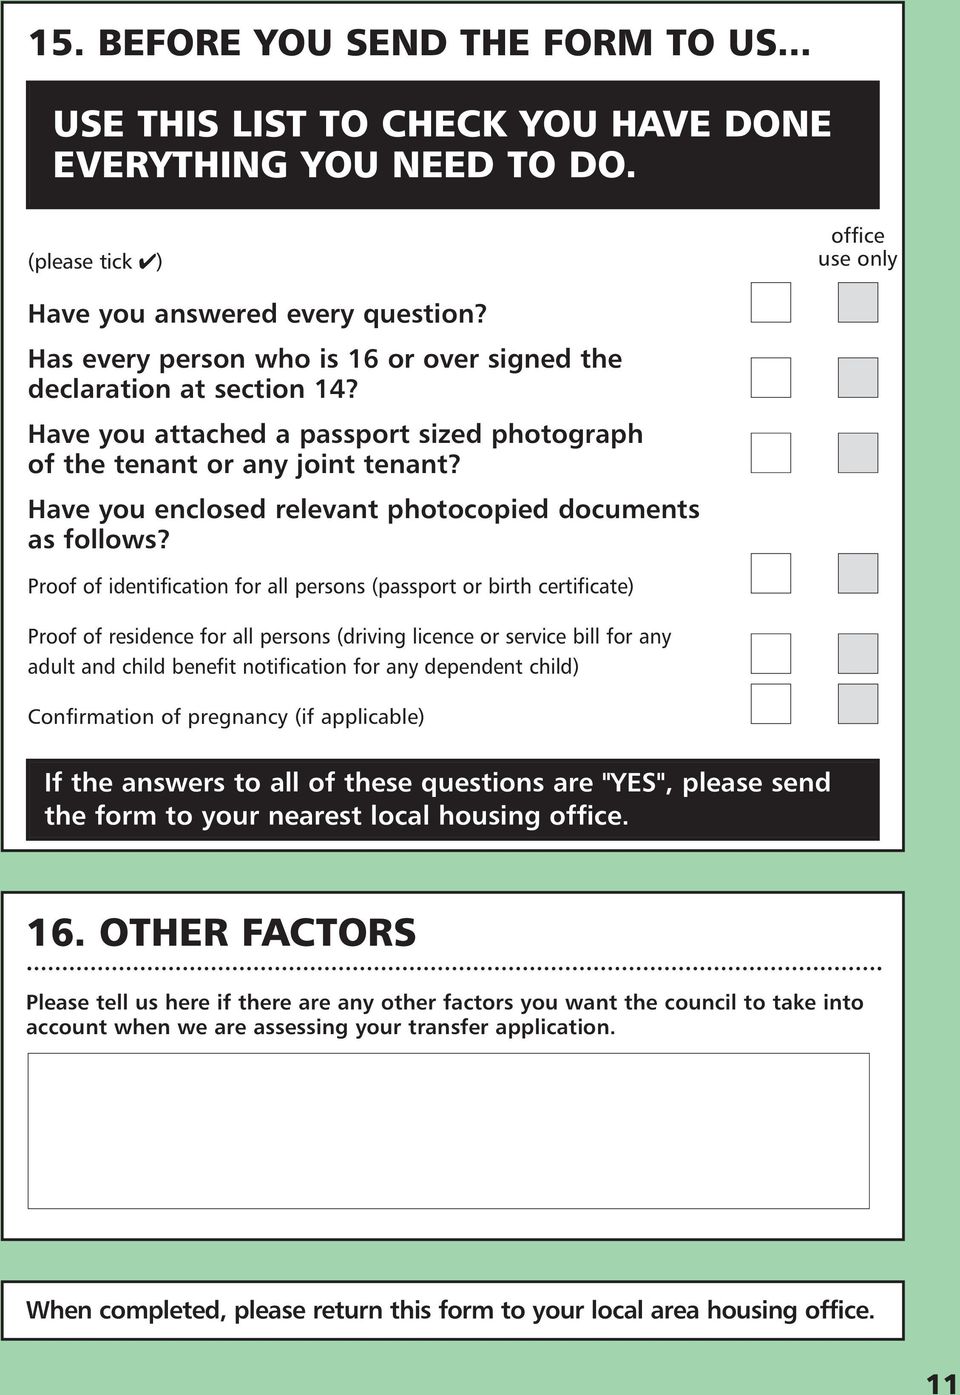 Have you enclosed relevant photocopied documents as follows?